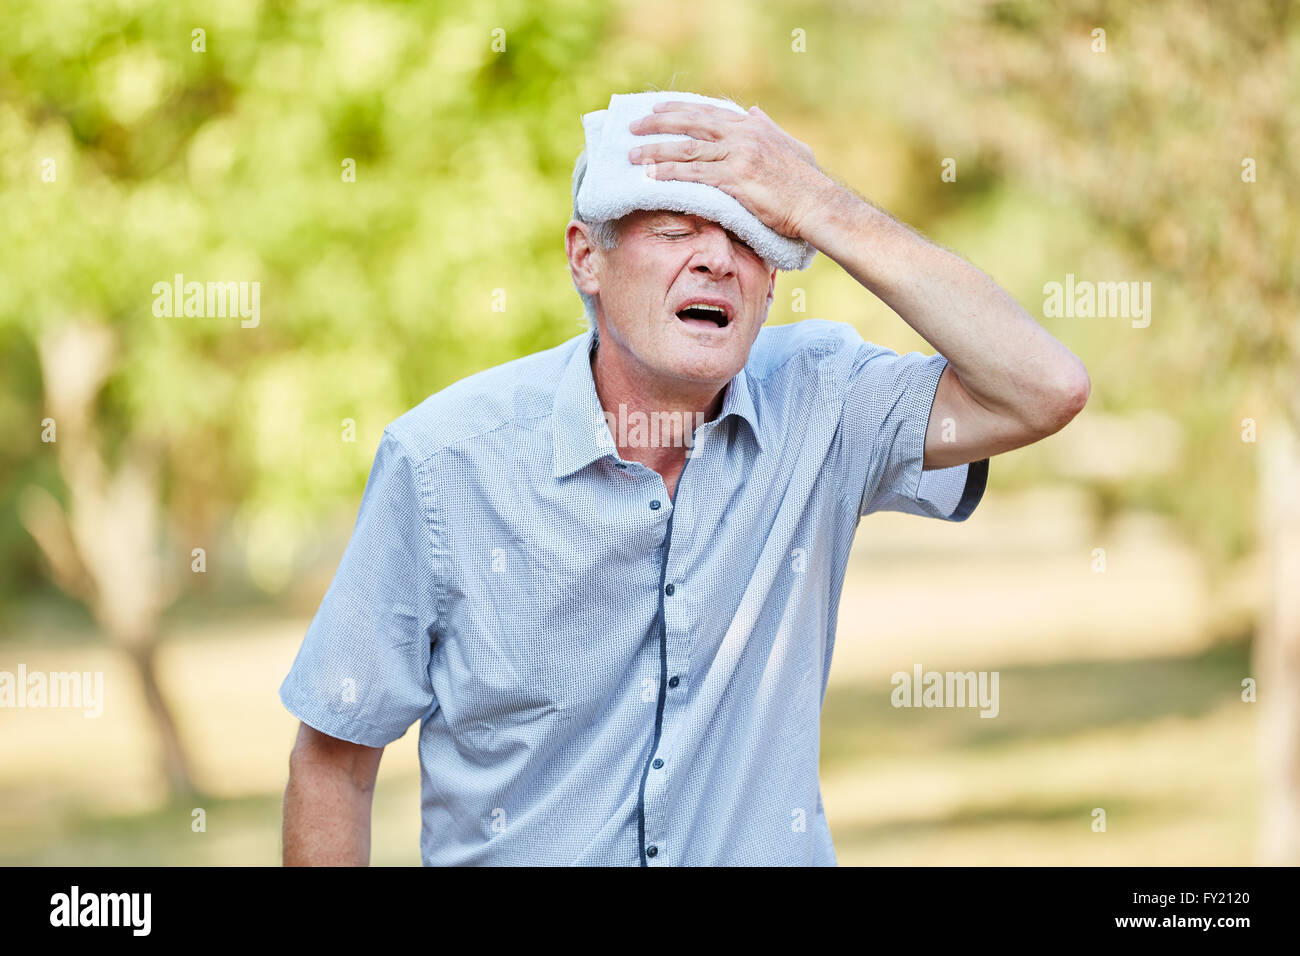 Senior fainting man cooling his head with wet cloth Stock Photo